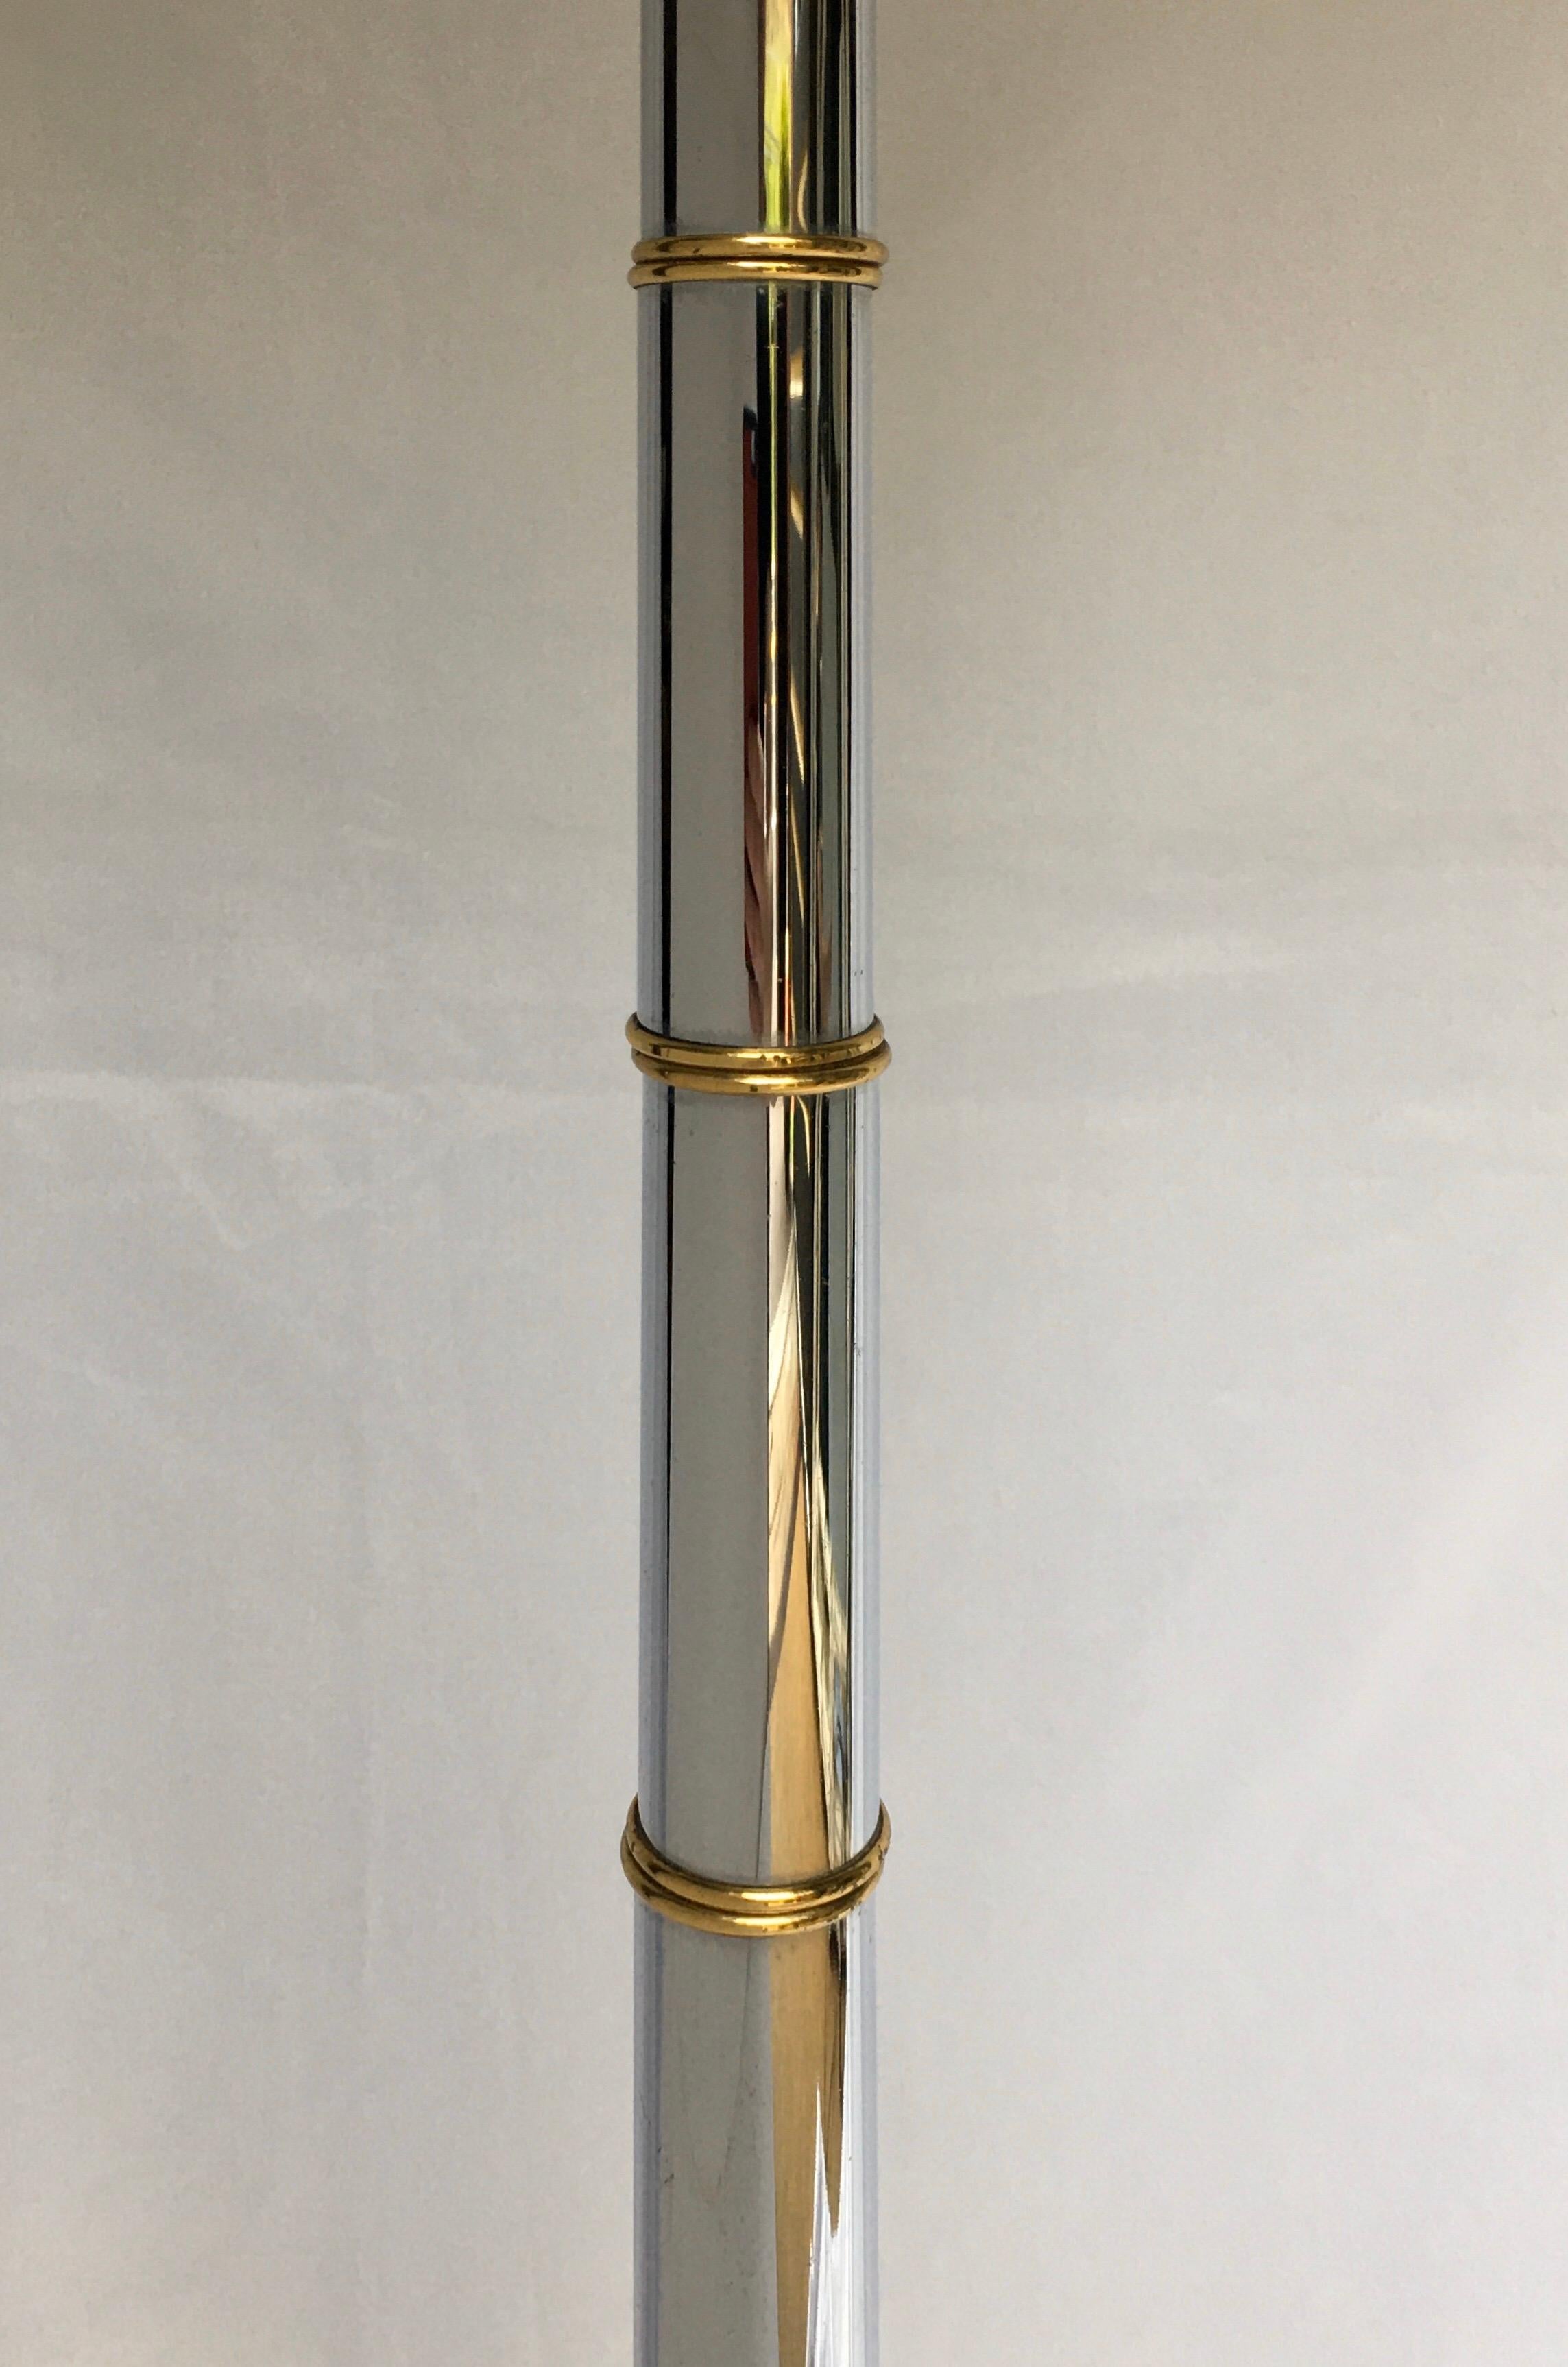 1970s Mid-Century Modern bamboo style chrome and brass plate floor lamp. Lamp shade not included. 

Measures: Height to harp 57.25 inches.
Height to socket 48.5 inches.